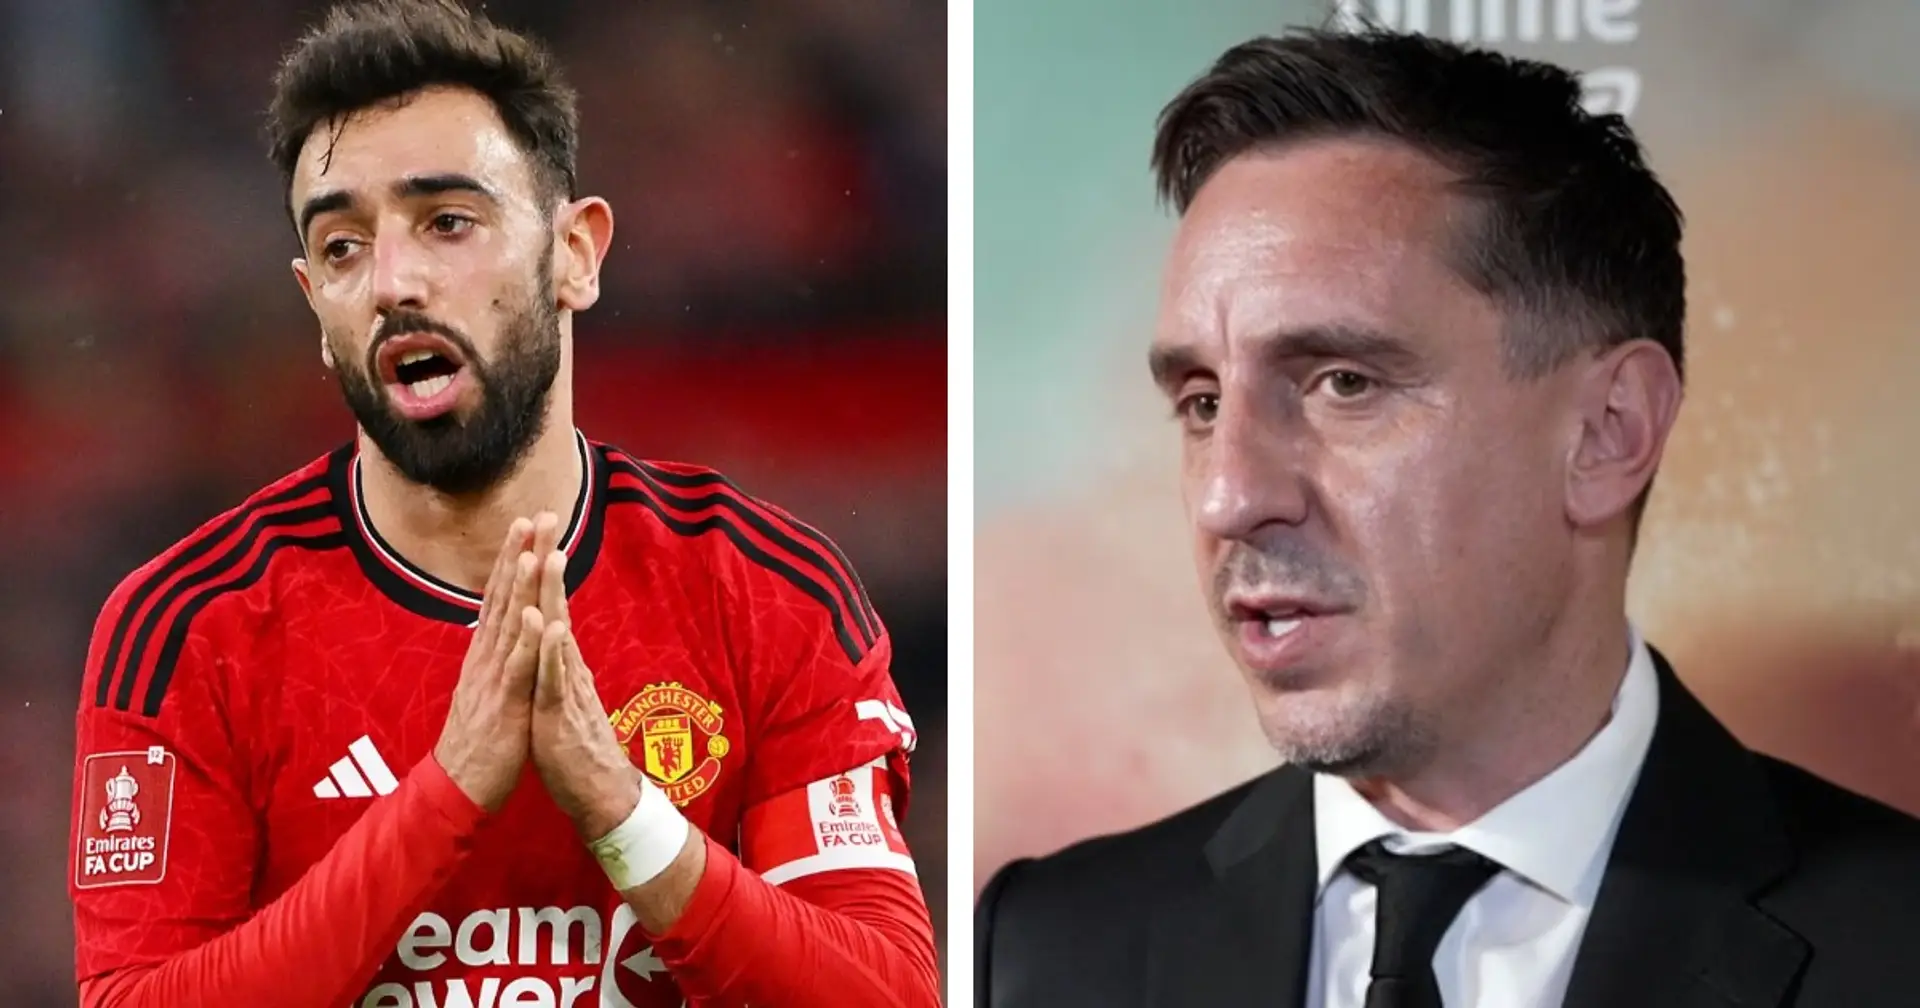 'Mustn't be easy for them': Neville admits to making current Man United team 'uncomfortable' due to TV comments